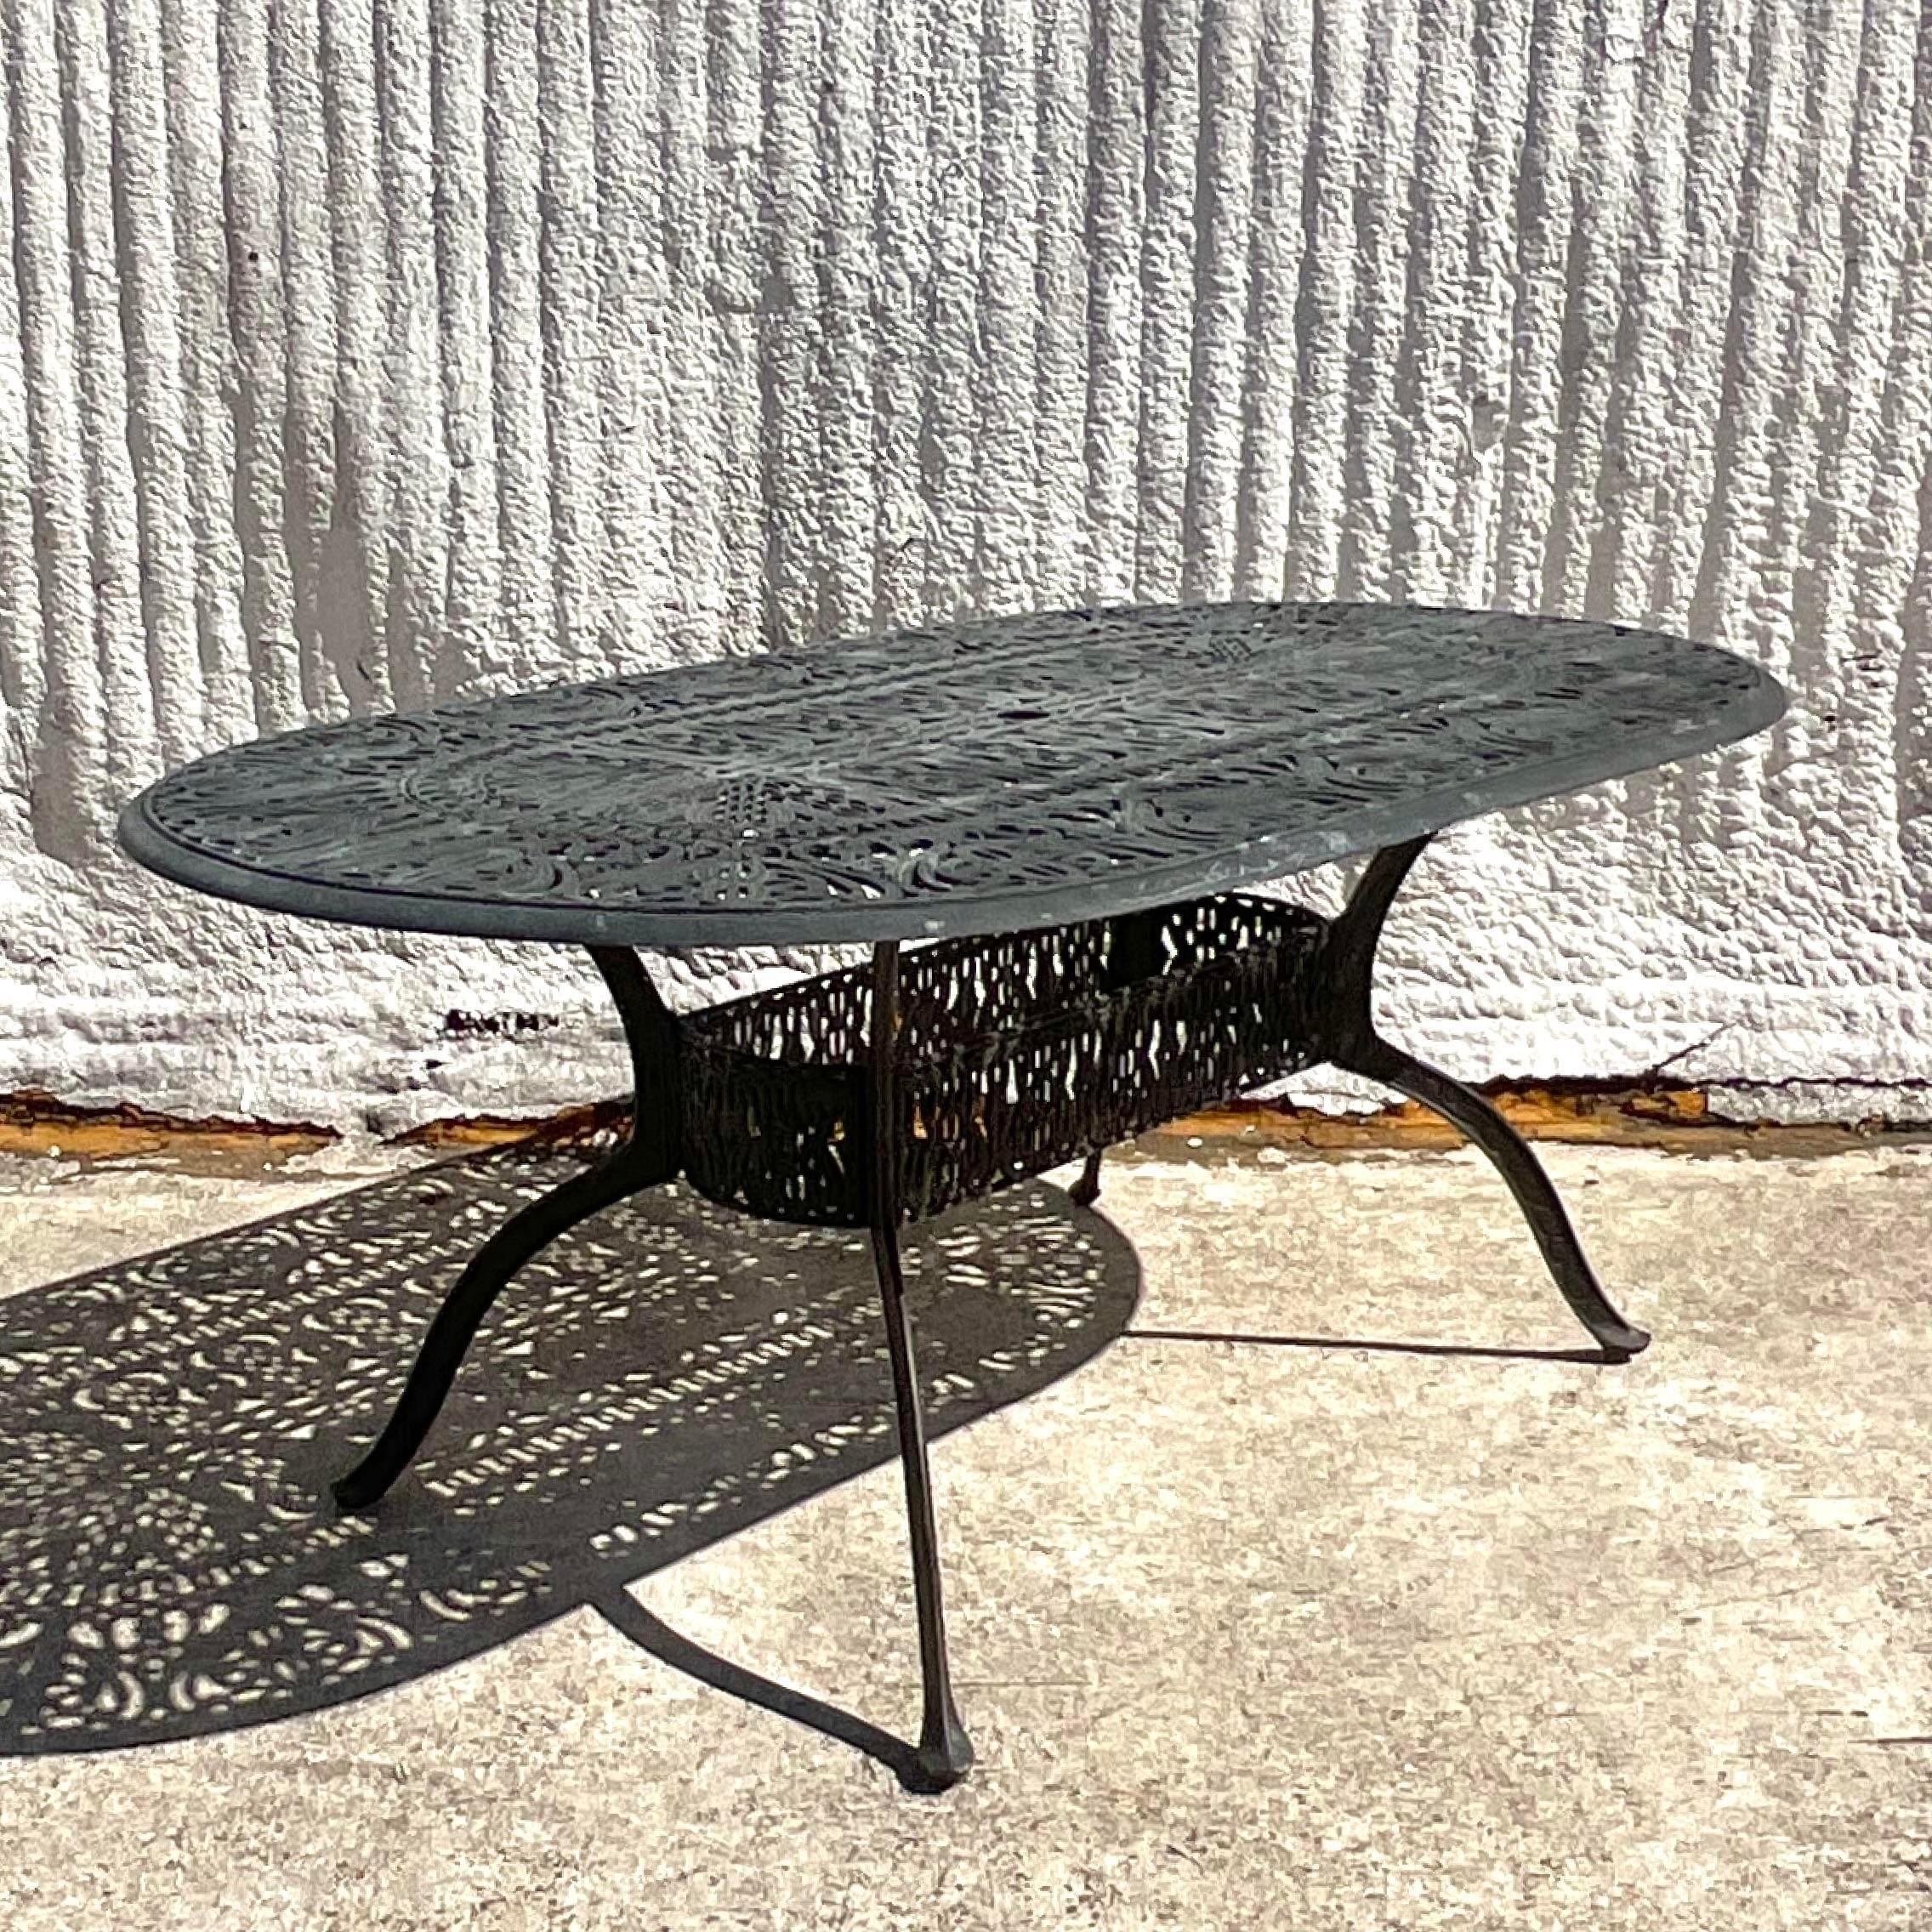 Vintage Coastal Hanamint Cast Aluminum Outdoor Dining Chairs - Set of 6 In Good Condition For Sale In west palm beach, FL